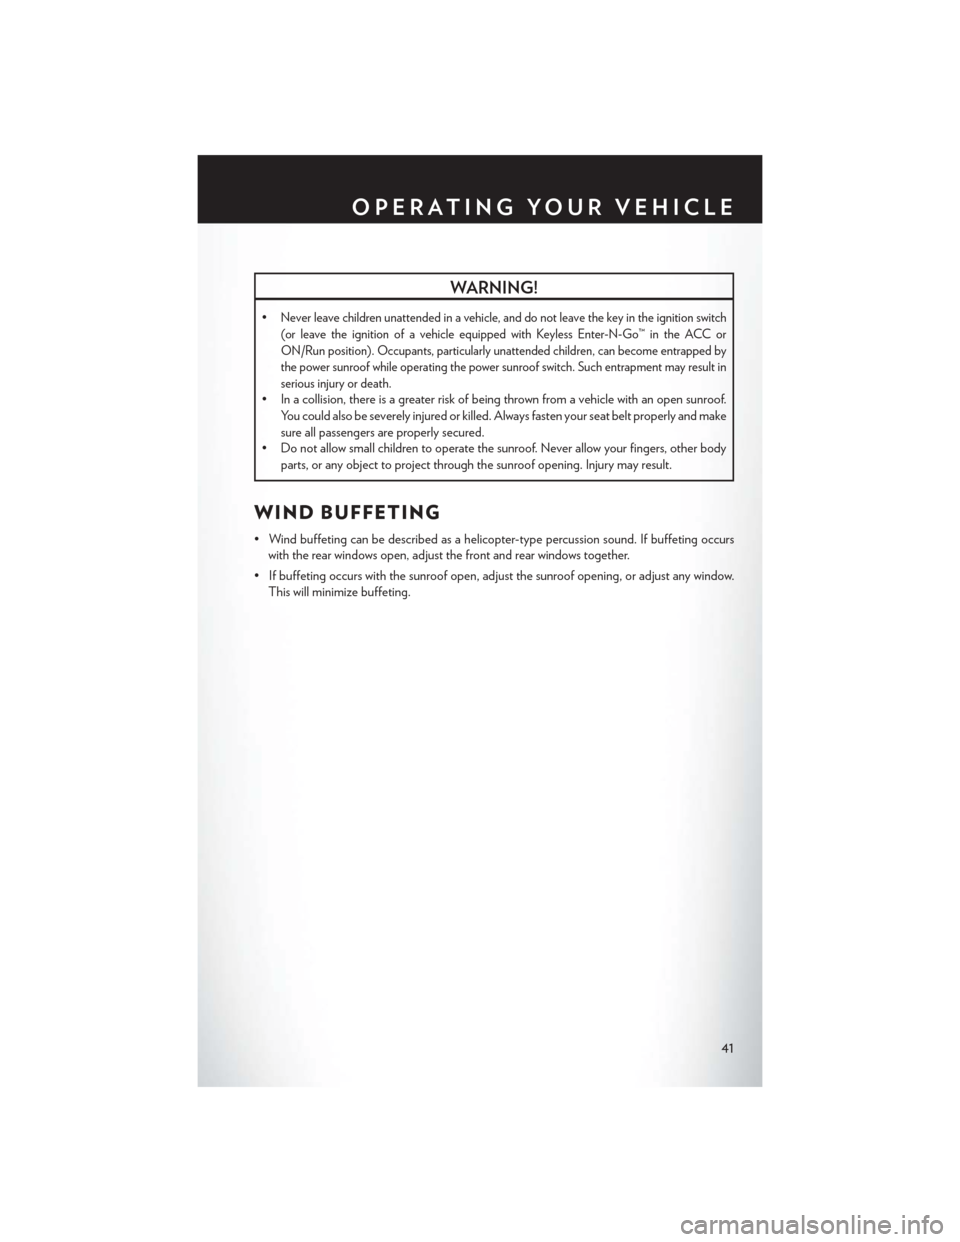 CHRYSLER TOWN AND COUNTRY 2013 5.G User Guide WARNING!
•Never leave children unattended in a vehicle, and do not leave the key in the ignition switch
(or leave the ignition of a vehicle equipped with Keyless Enter-N-Go™ in the ACC or
ON/Run p